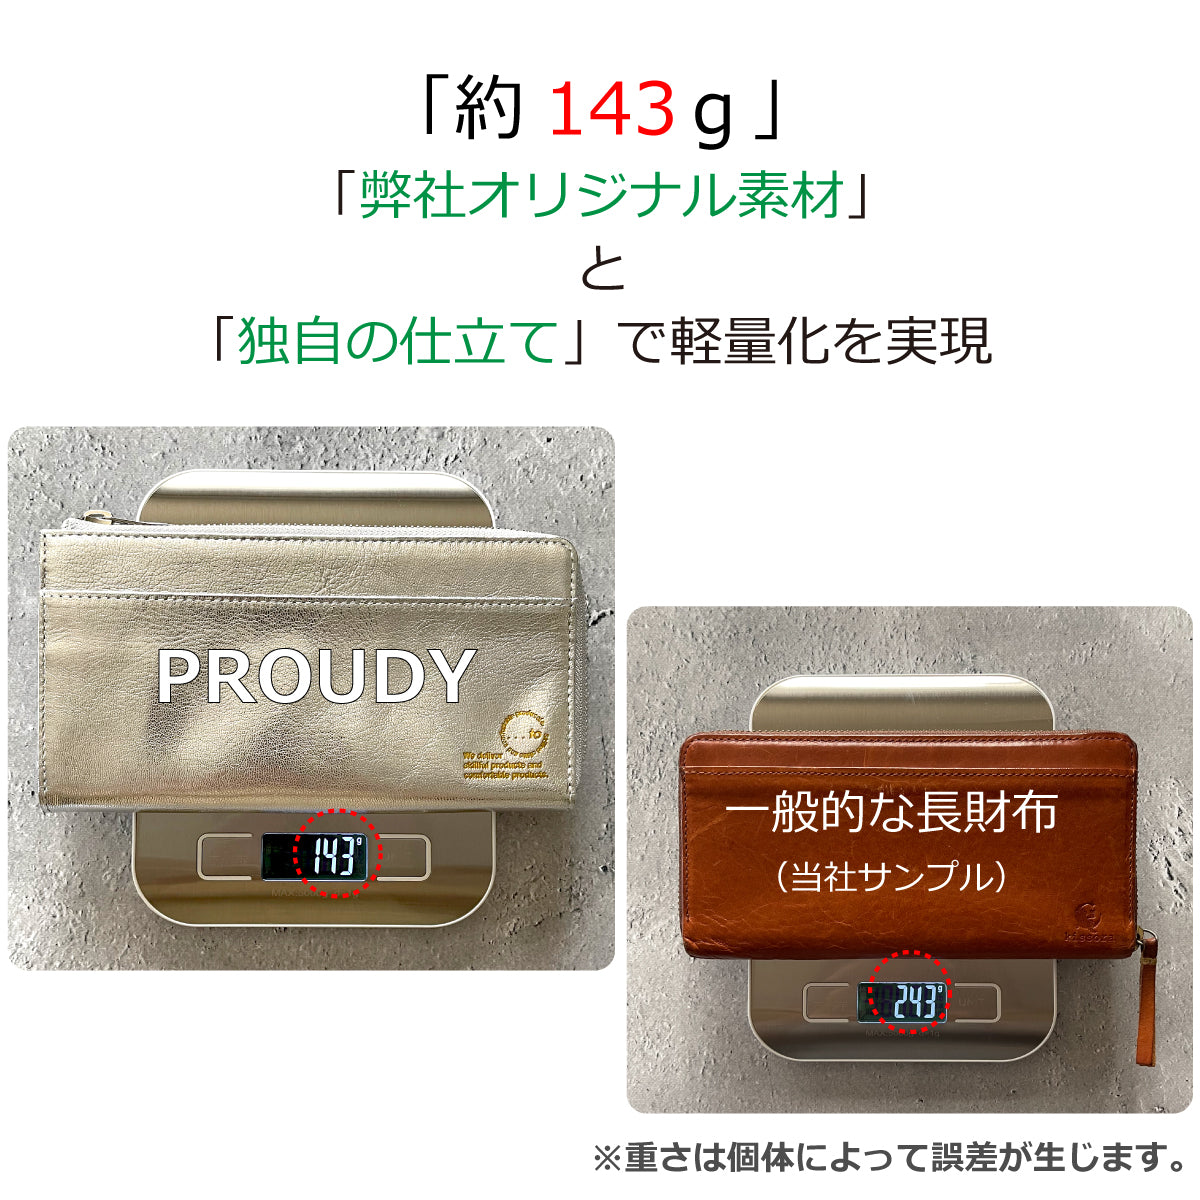 【...to®・PROUDY】Gold & Silver・「最大収納30枚」を膨らまずに収納可能。カード28枚が「美しく並ぶ」整う長財布  全2色